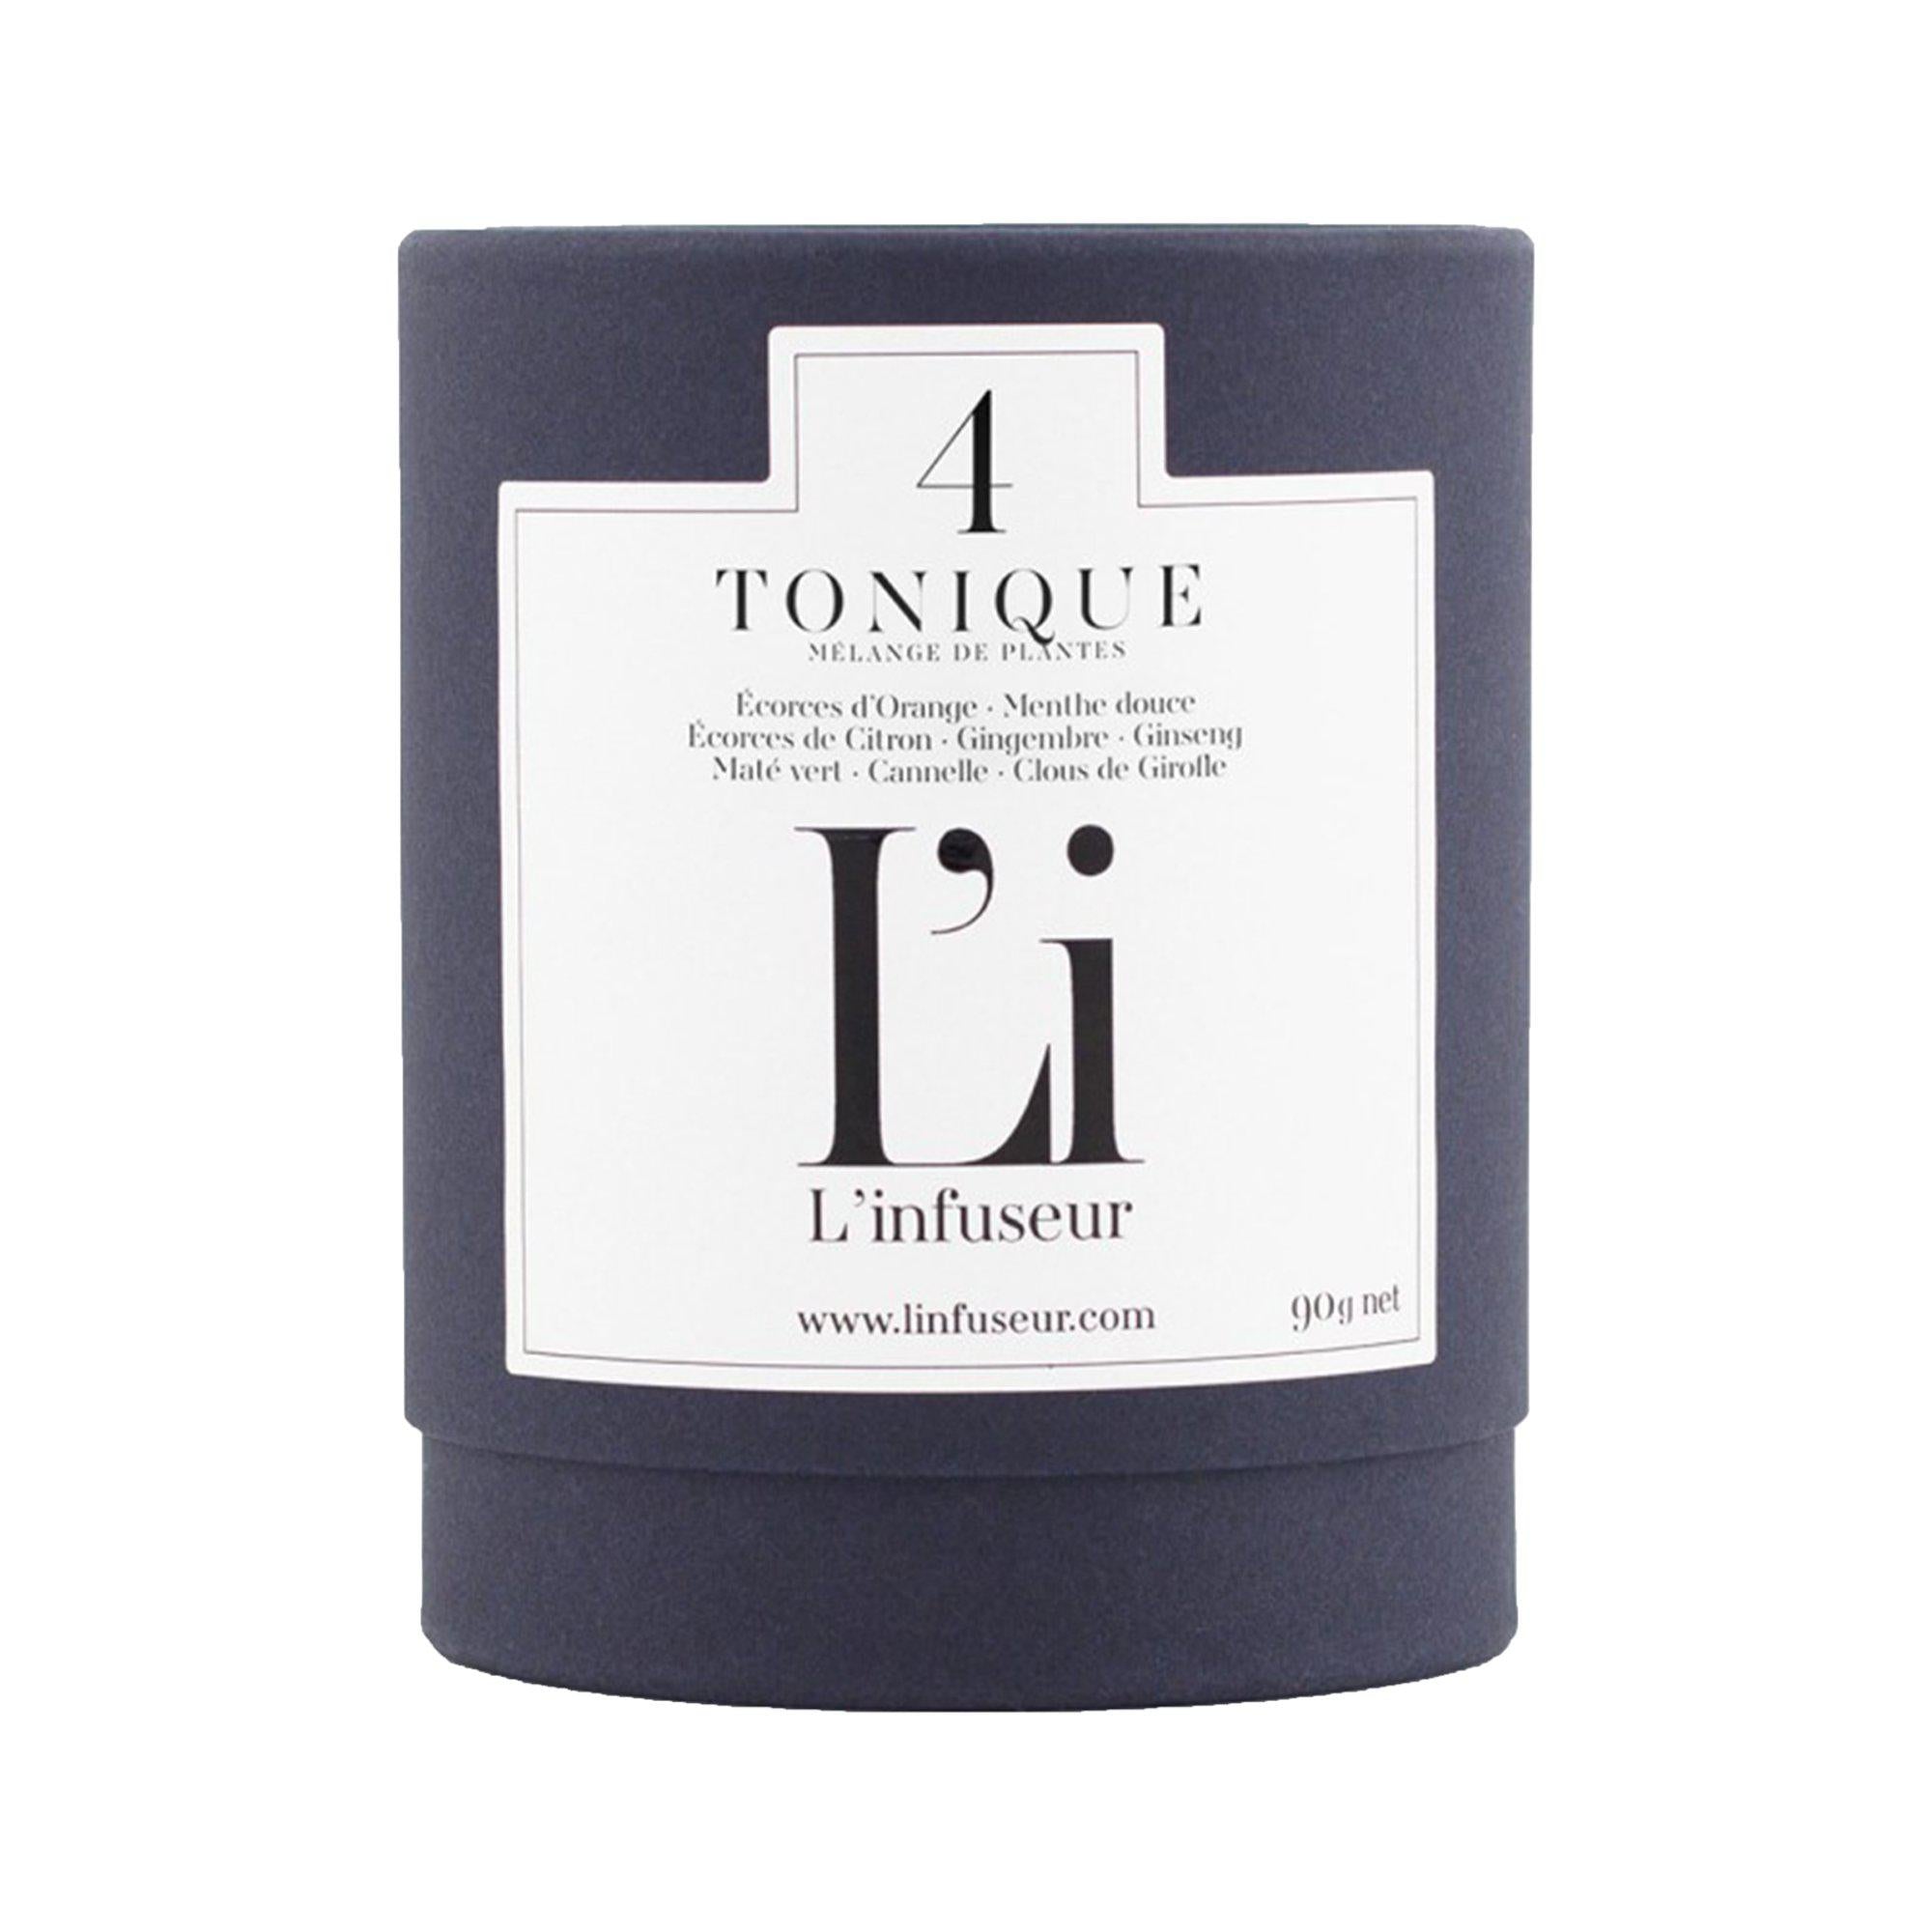 L'infusion n°4 - Tonique Infusion n°4 - Tonic - L'infuseur